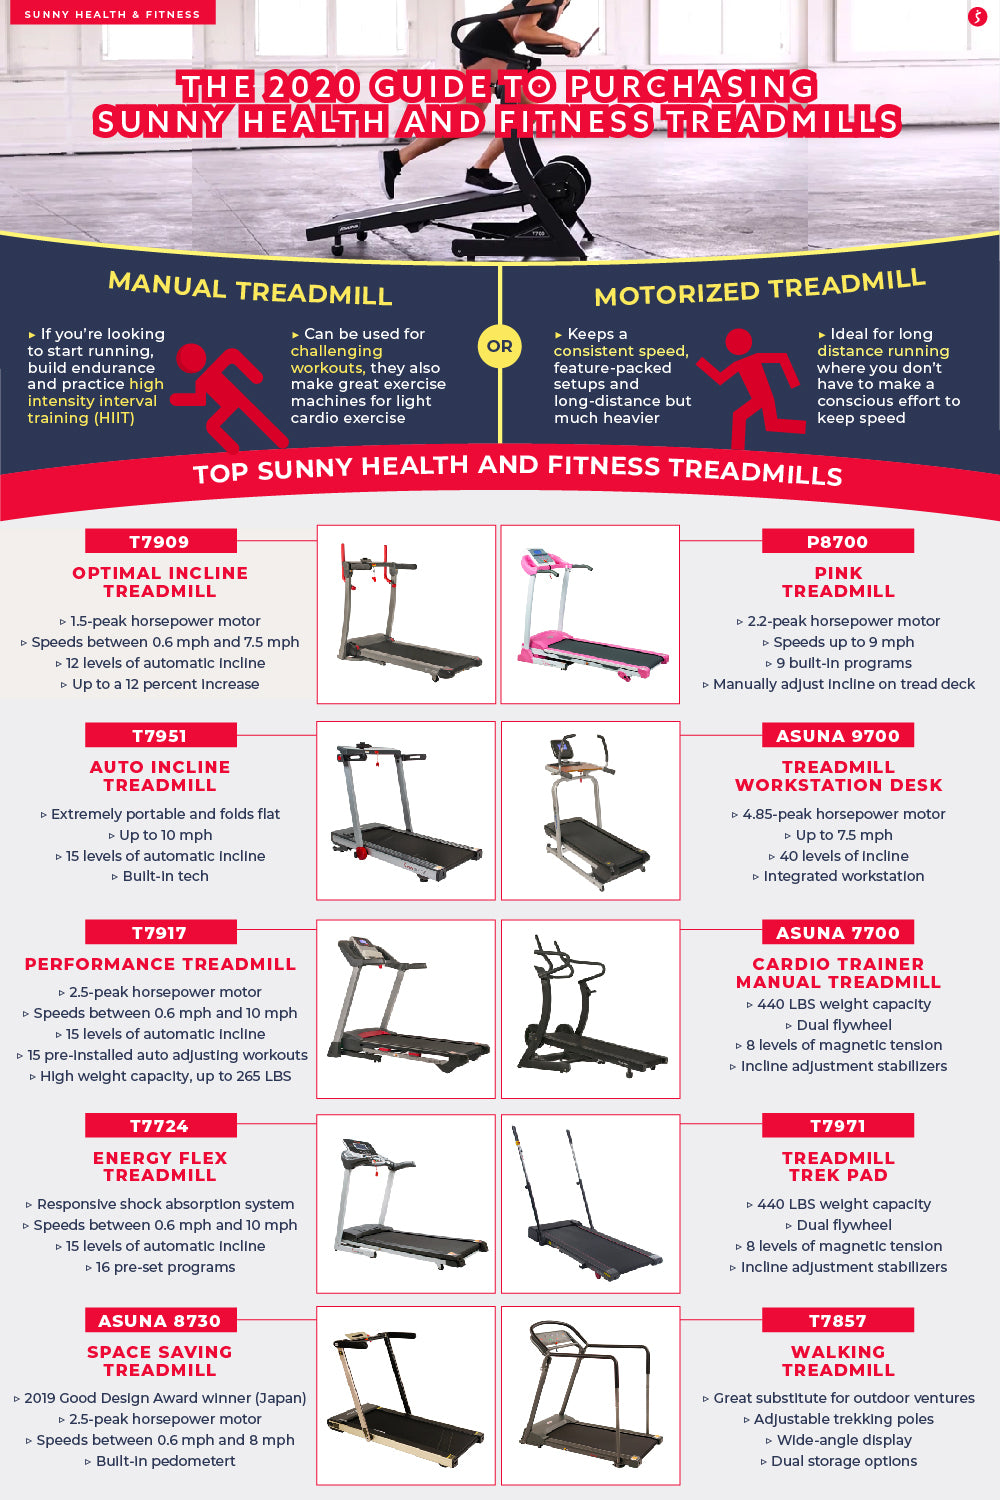 The 2020 Guide to Purchasing Sunny Health and Fitness Treadmills Infographic